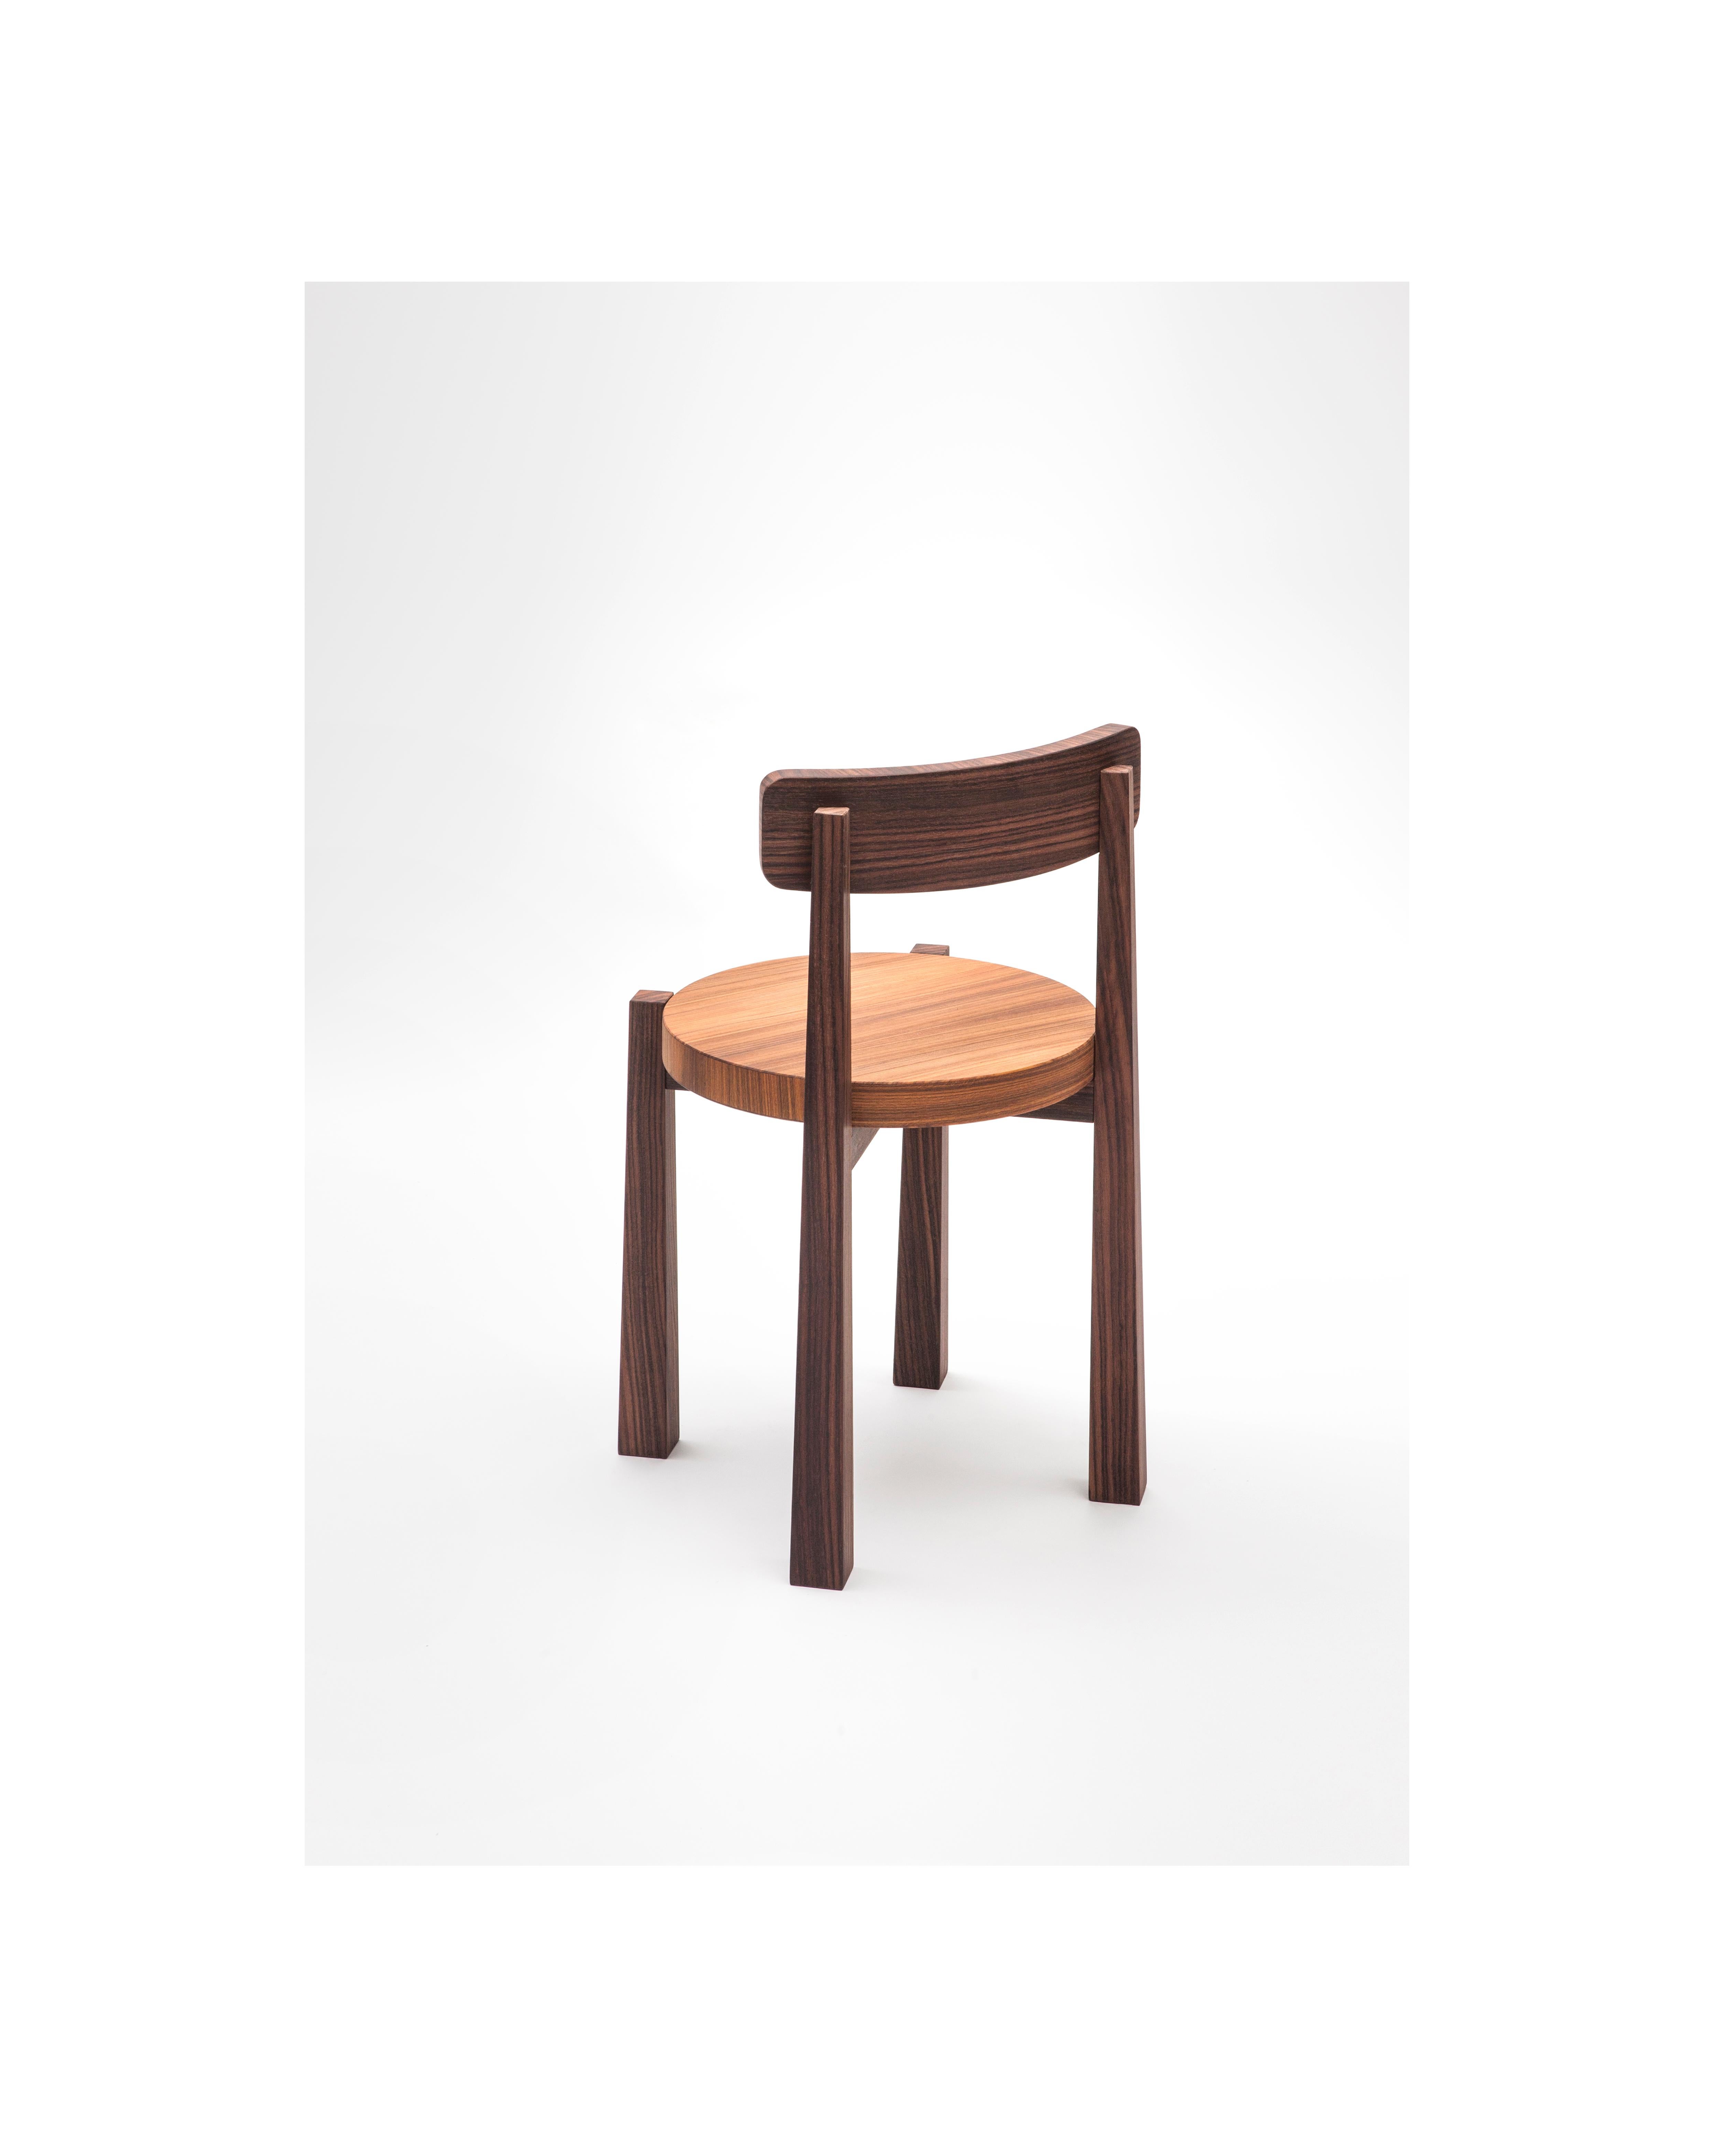 Indian, Rosewood Sediolina Chair by Antonio Aricò for Delvis Unlimited In New Condition For Sale In Milan, Milan